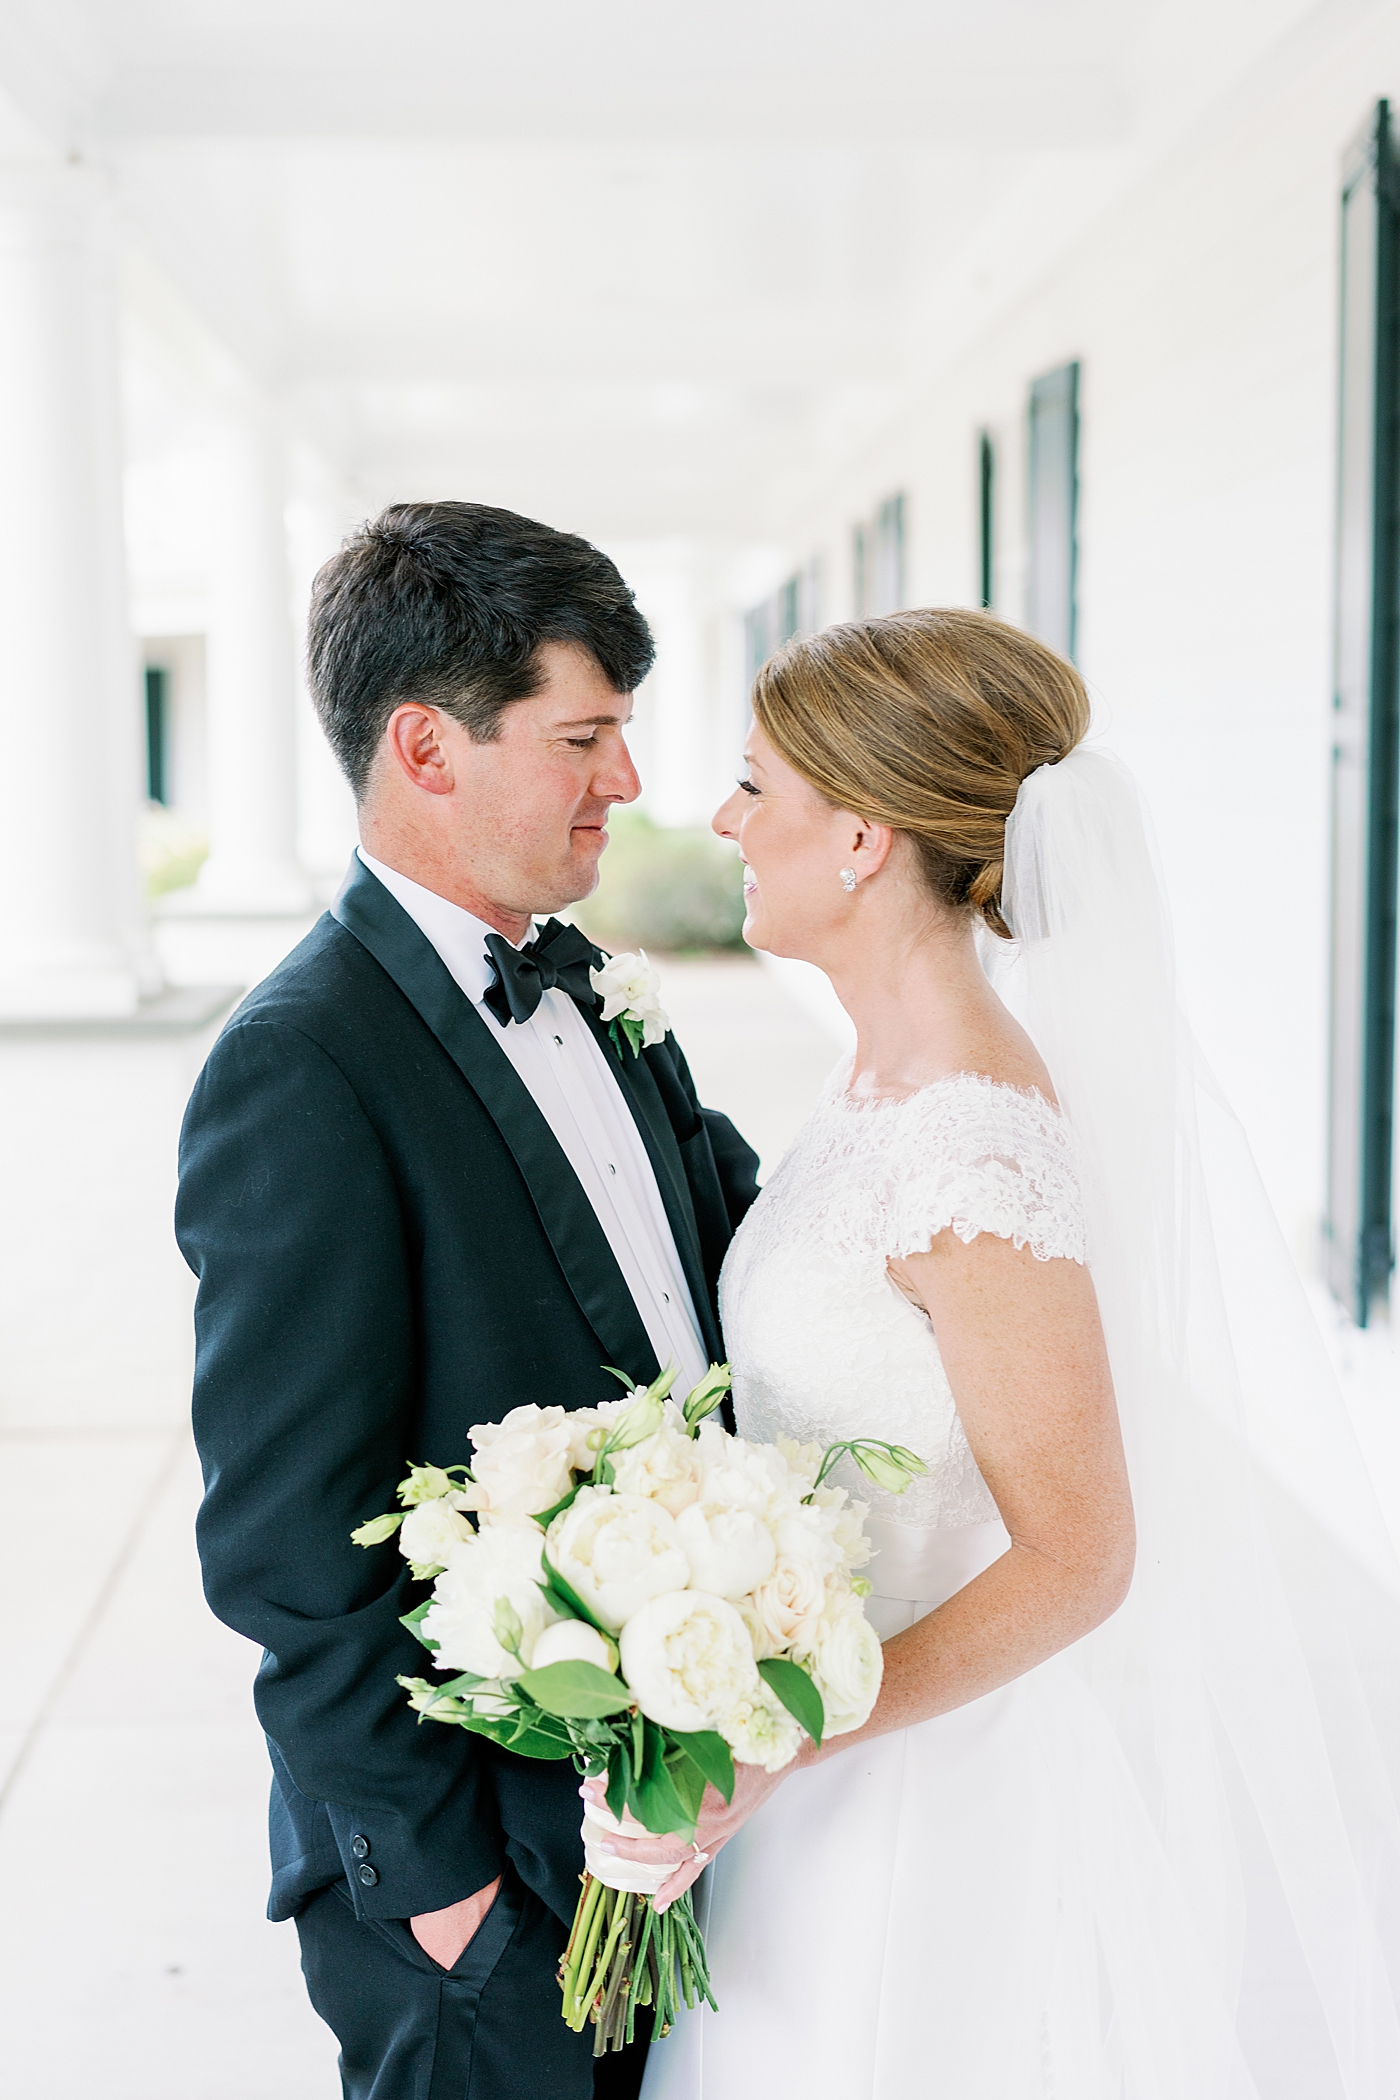 Bride and groom smiling together on a porch | Image by Annie Laura Photo